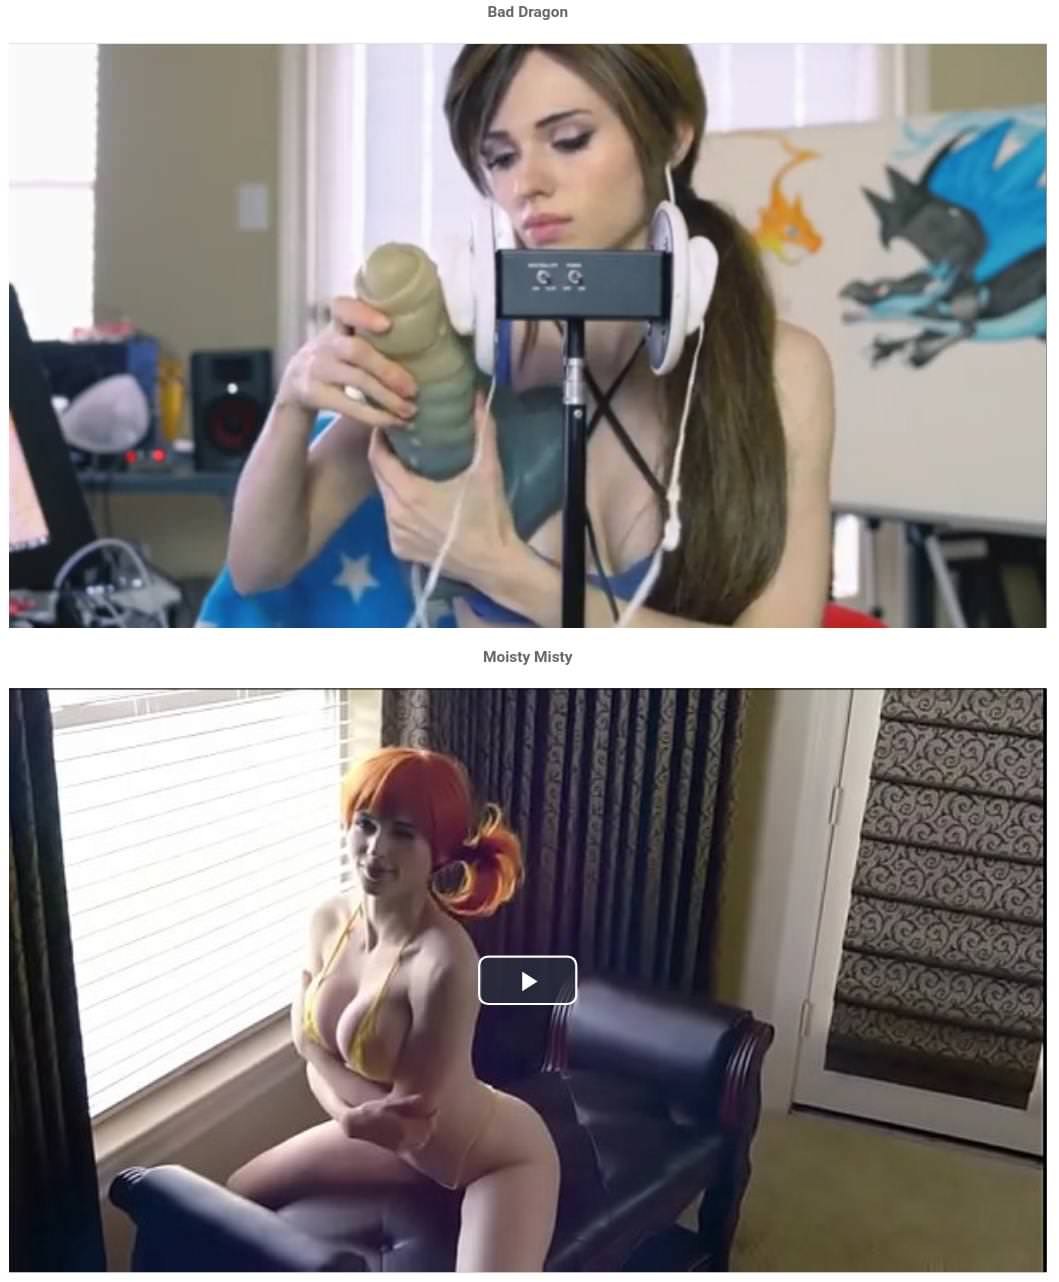 Twitch streamer who does porn